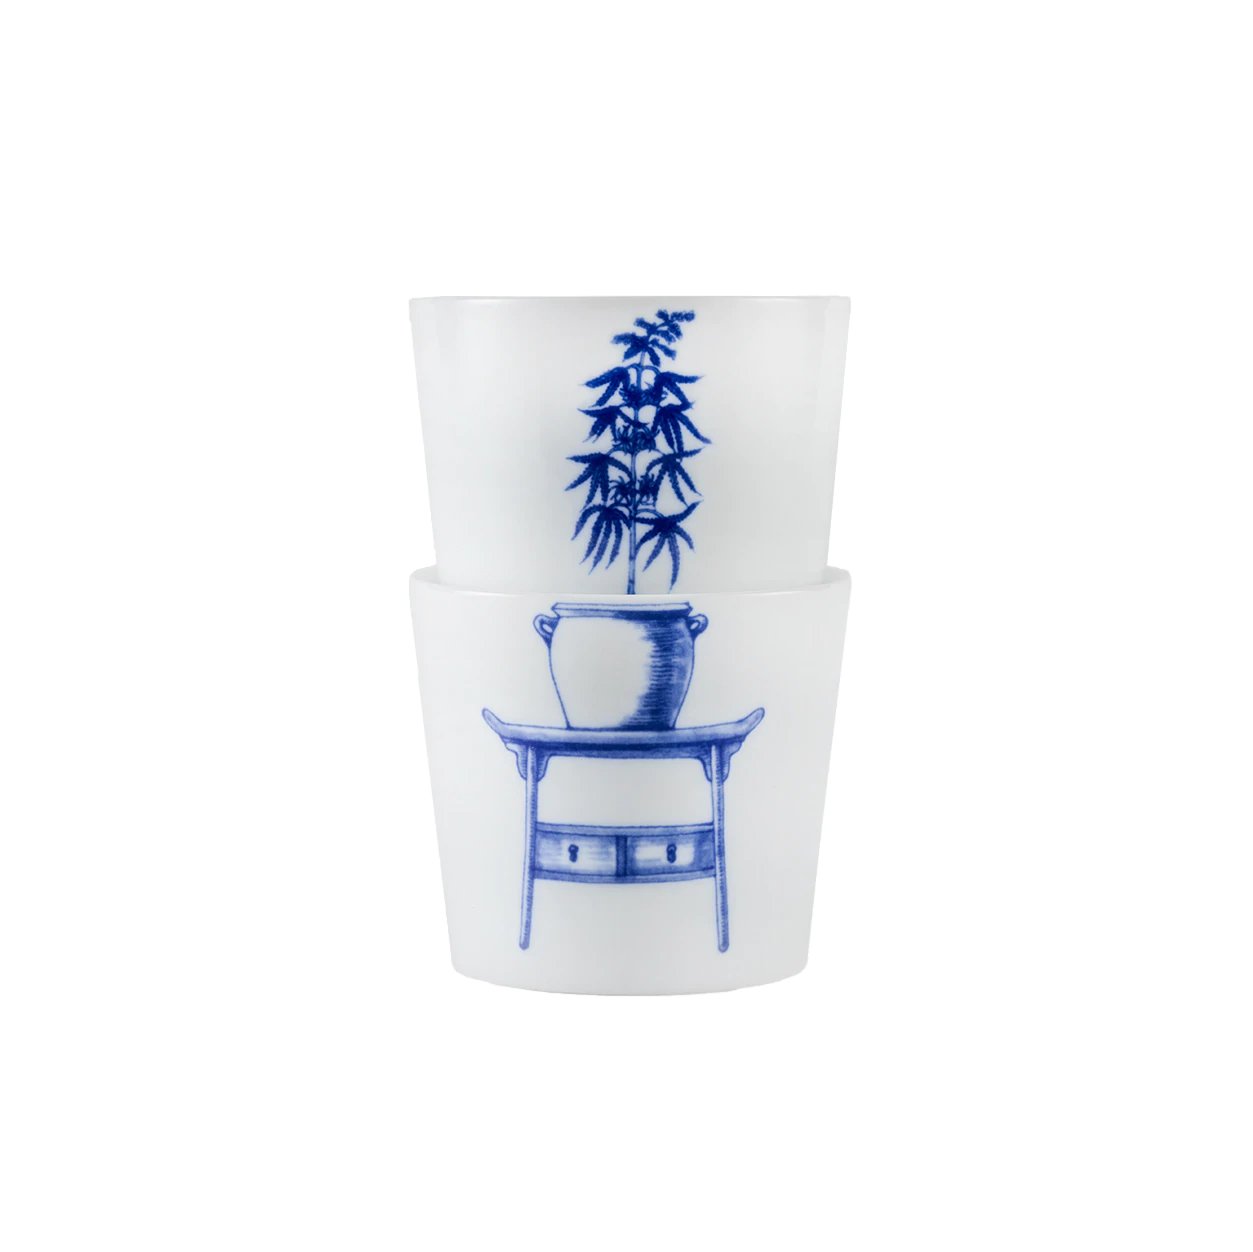 Bonsai Cups - Weed design, showing two cups stacked together